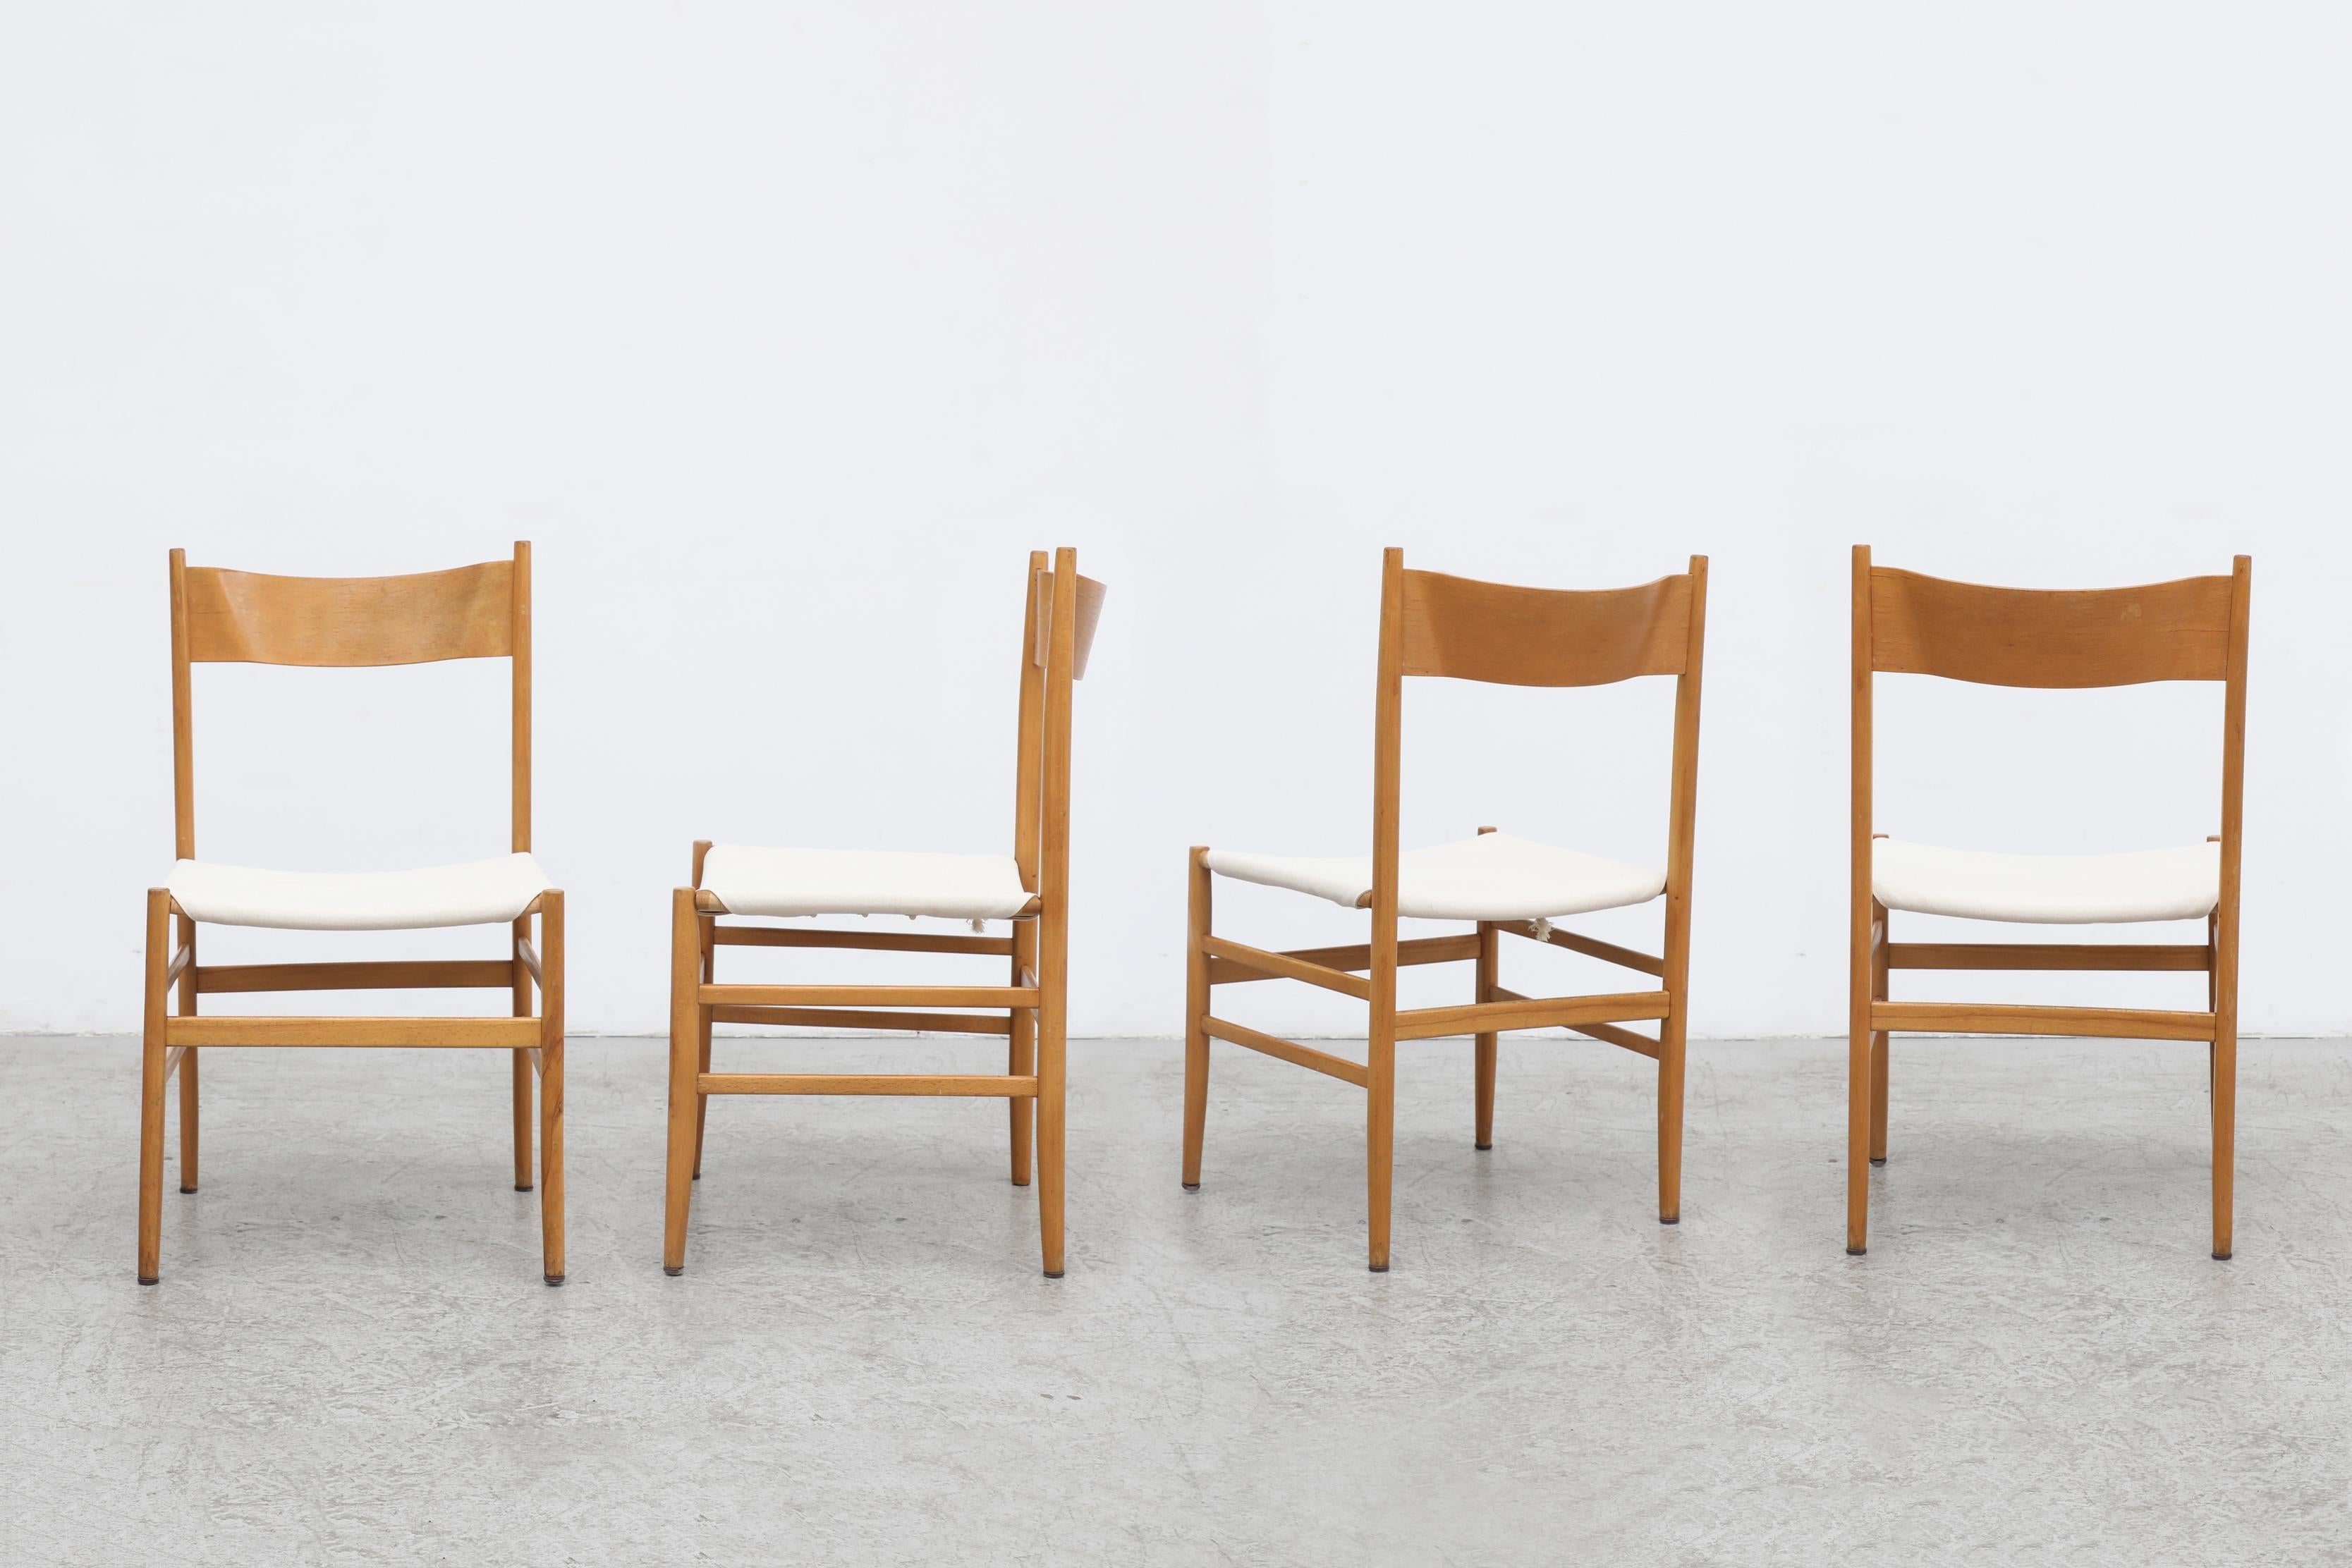 Hans Wegner Inspired Danish Blonde Dining Chairs with New White Canvas Seats In Good Condition For Sale In Los Angeles, CA